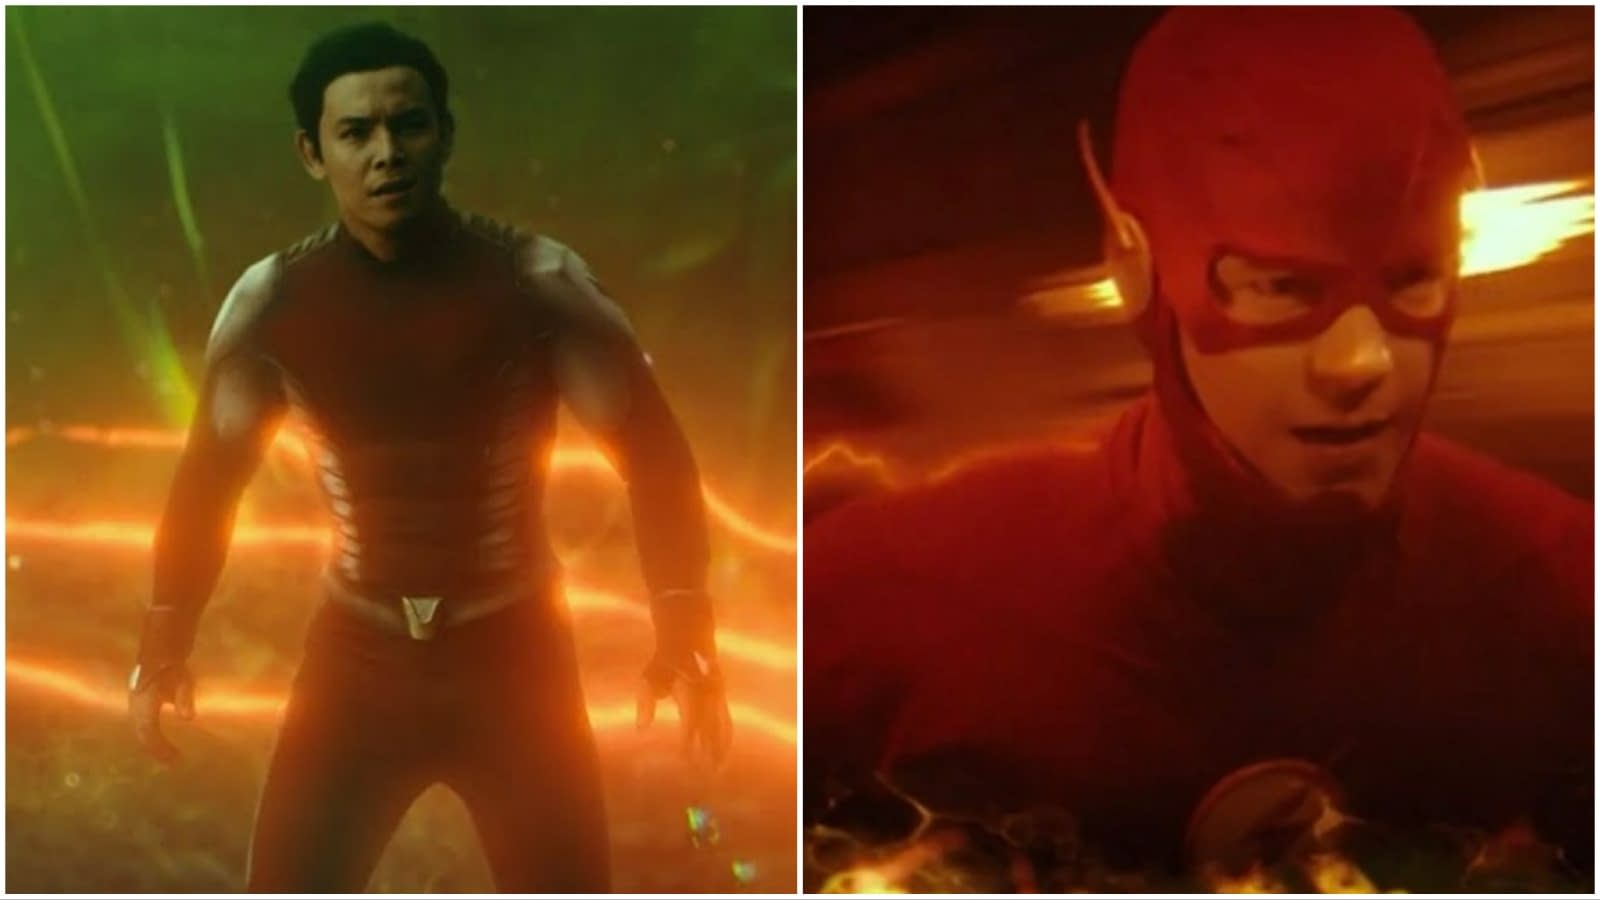 That 'Titans' Multiverse Scene Explained From 'Shazam' to 'The Flash